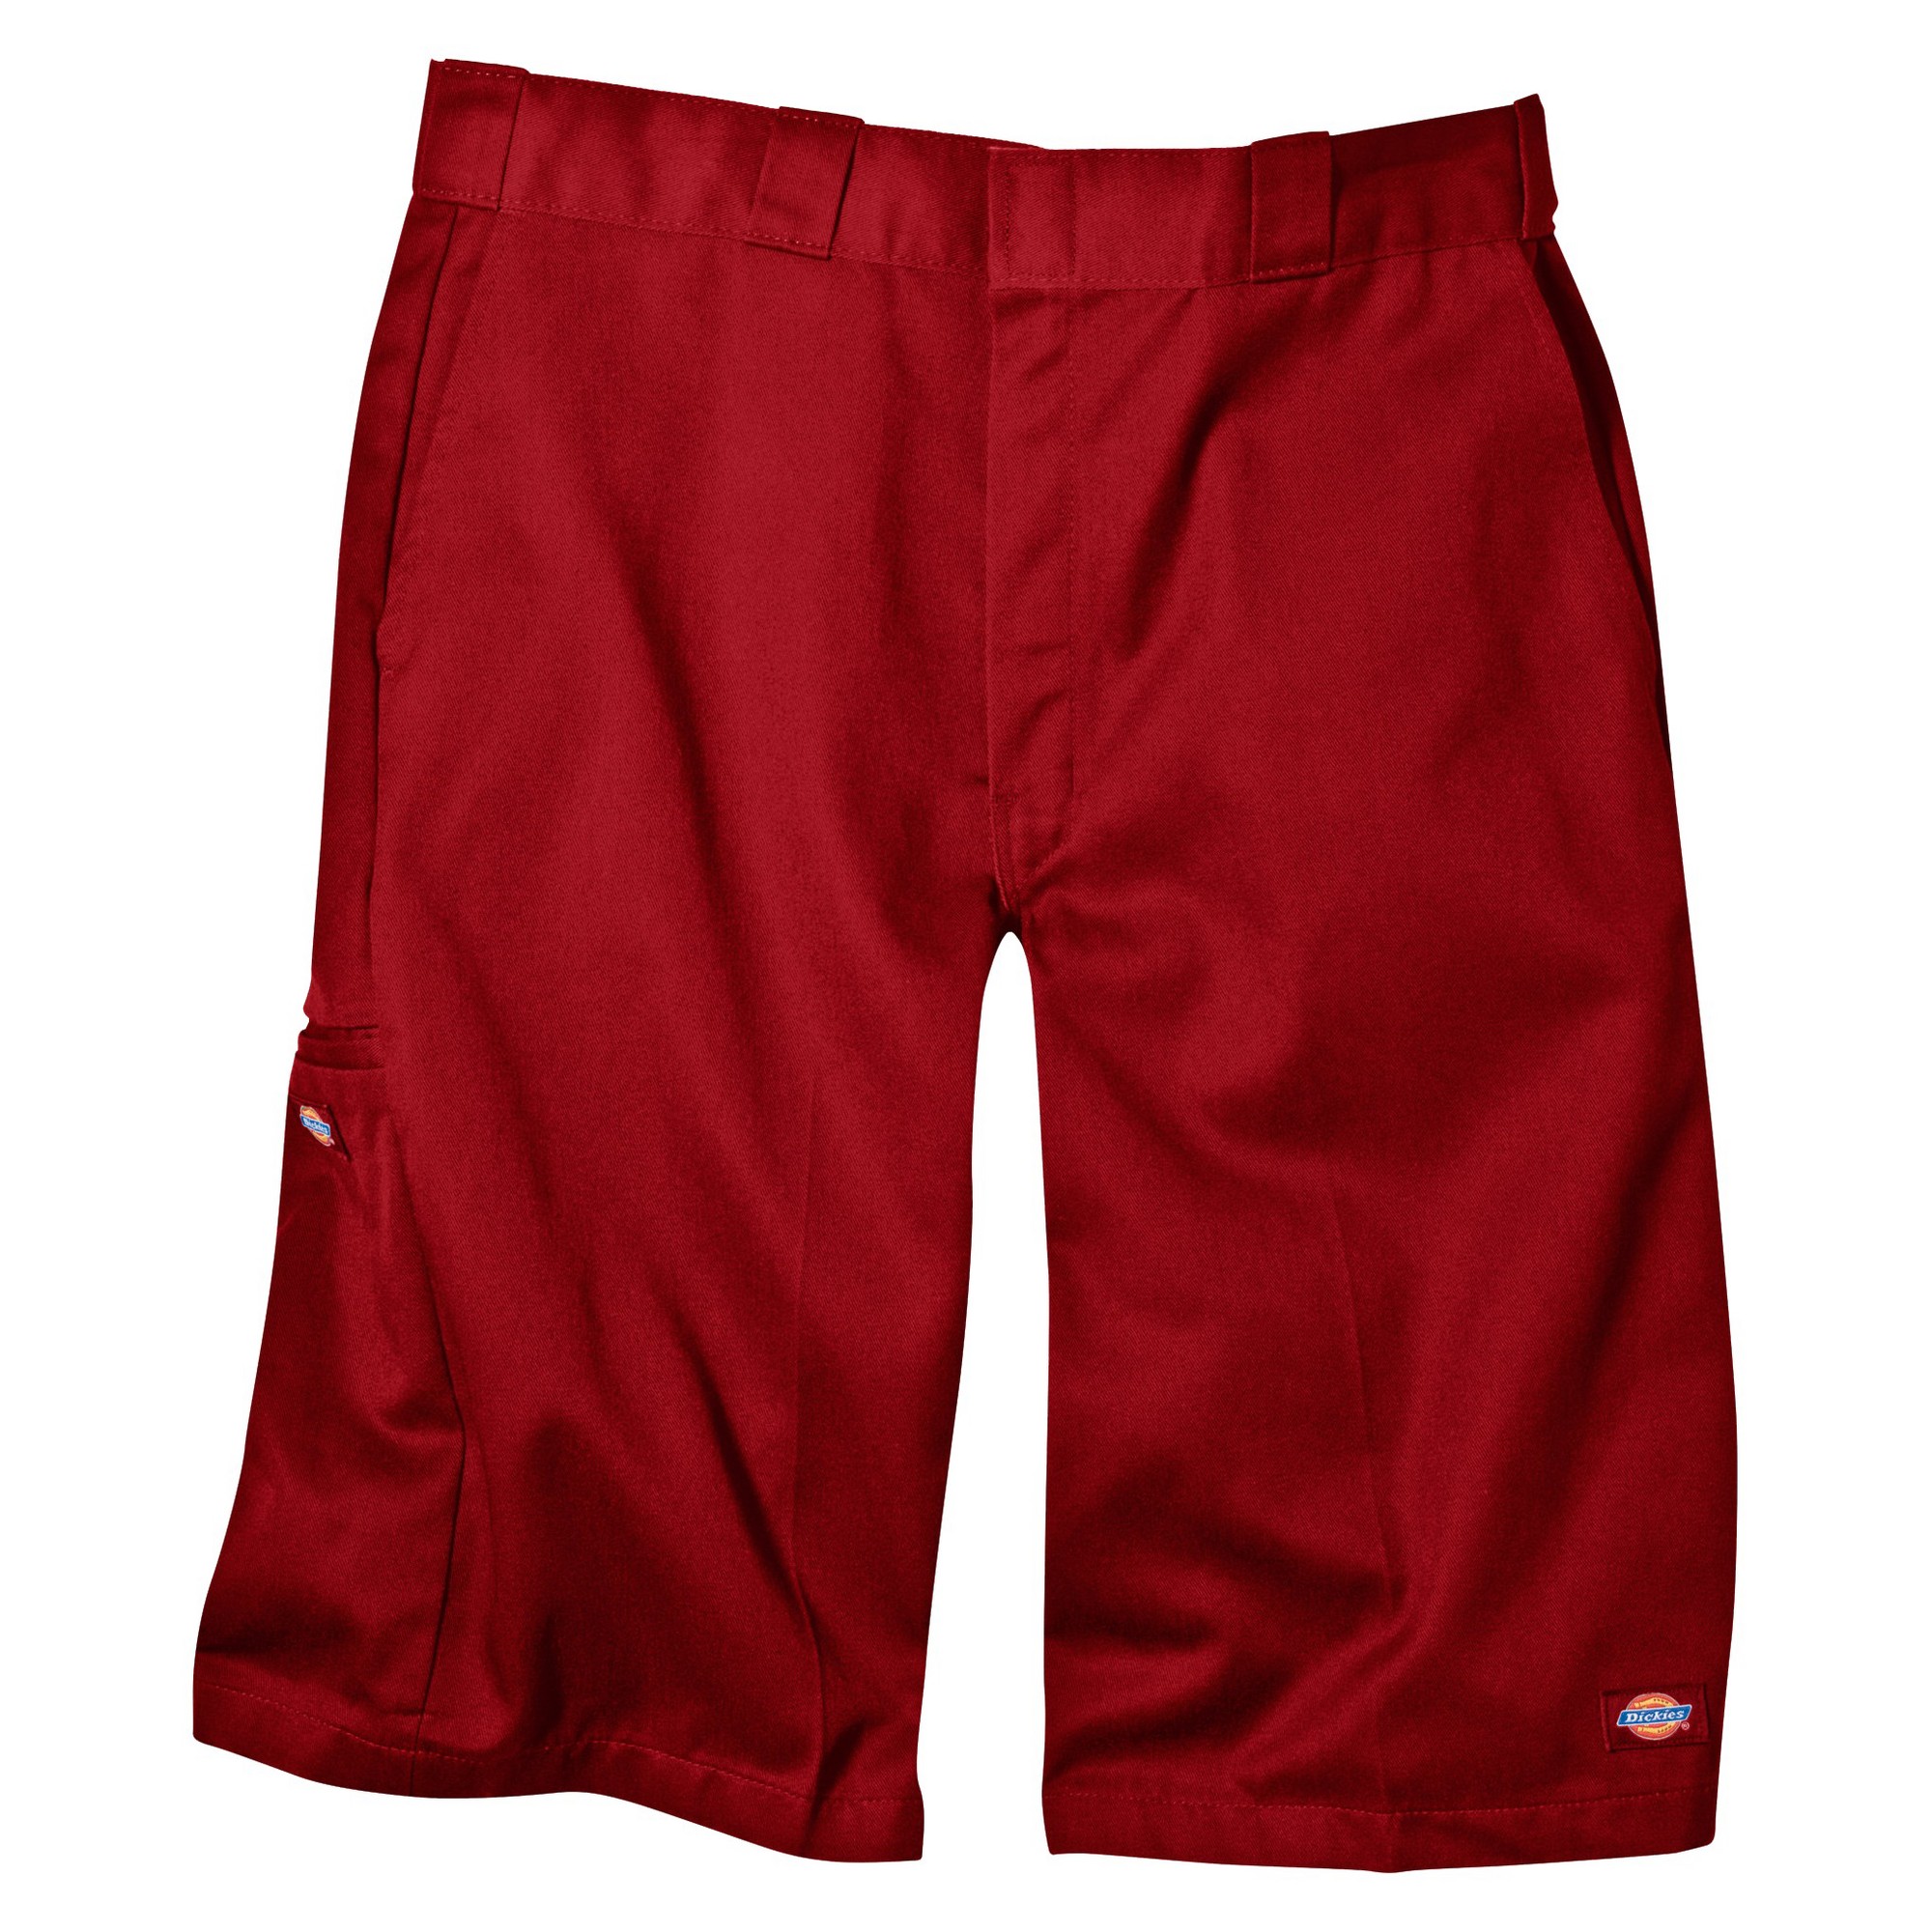 'Dickies Men's Loose Fit Twill 13'' Multi-Pocket Work Shorts- English Red 30'